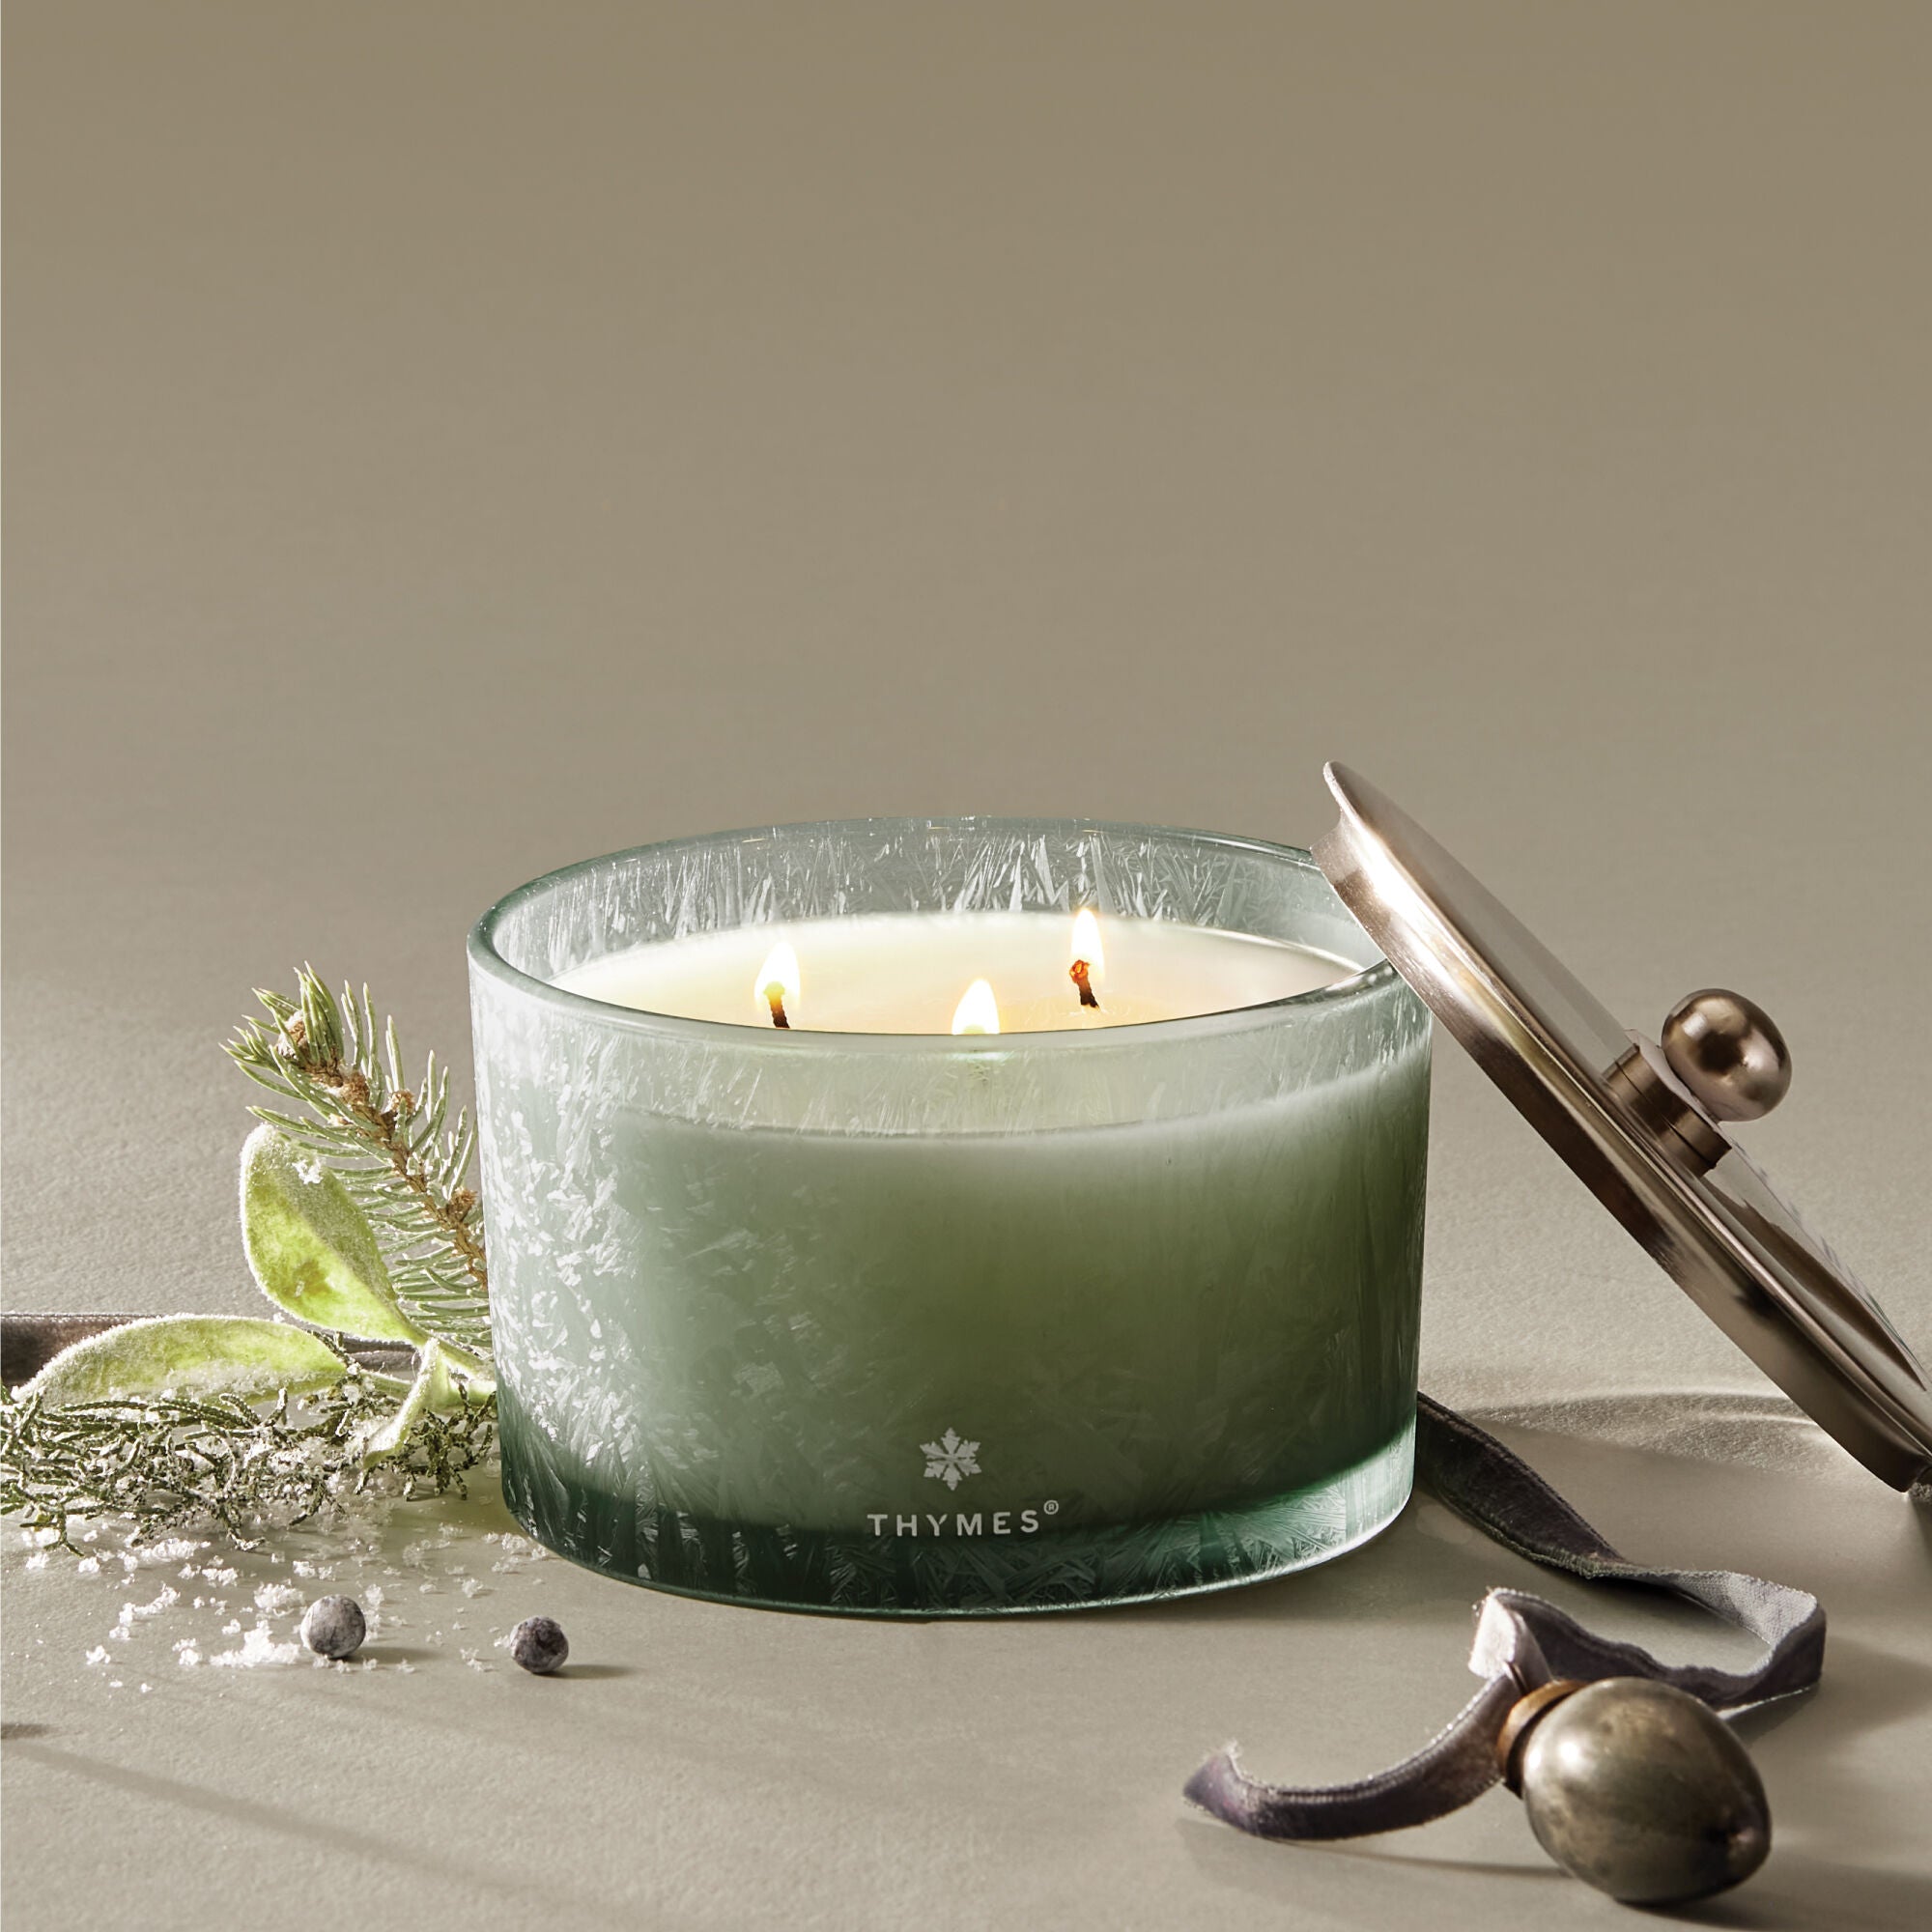 HIGHLAND FROST CANDLE 18 OZ NET WT / 510 G